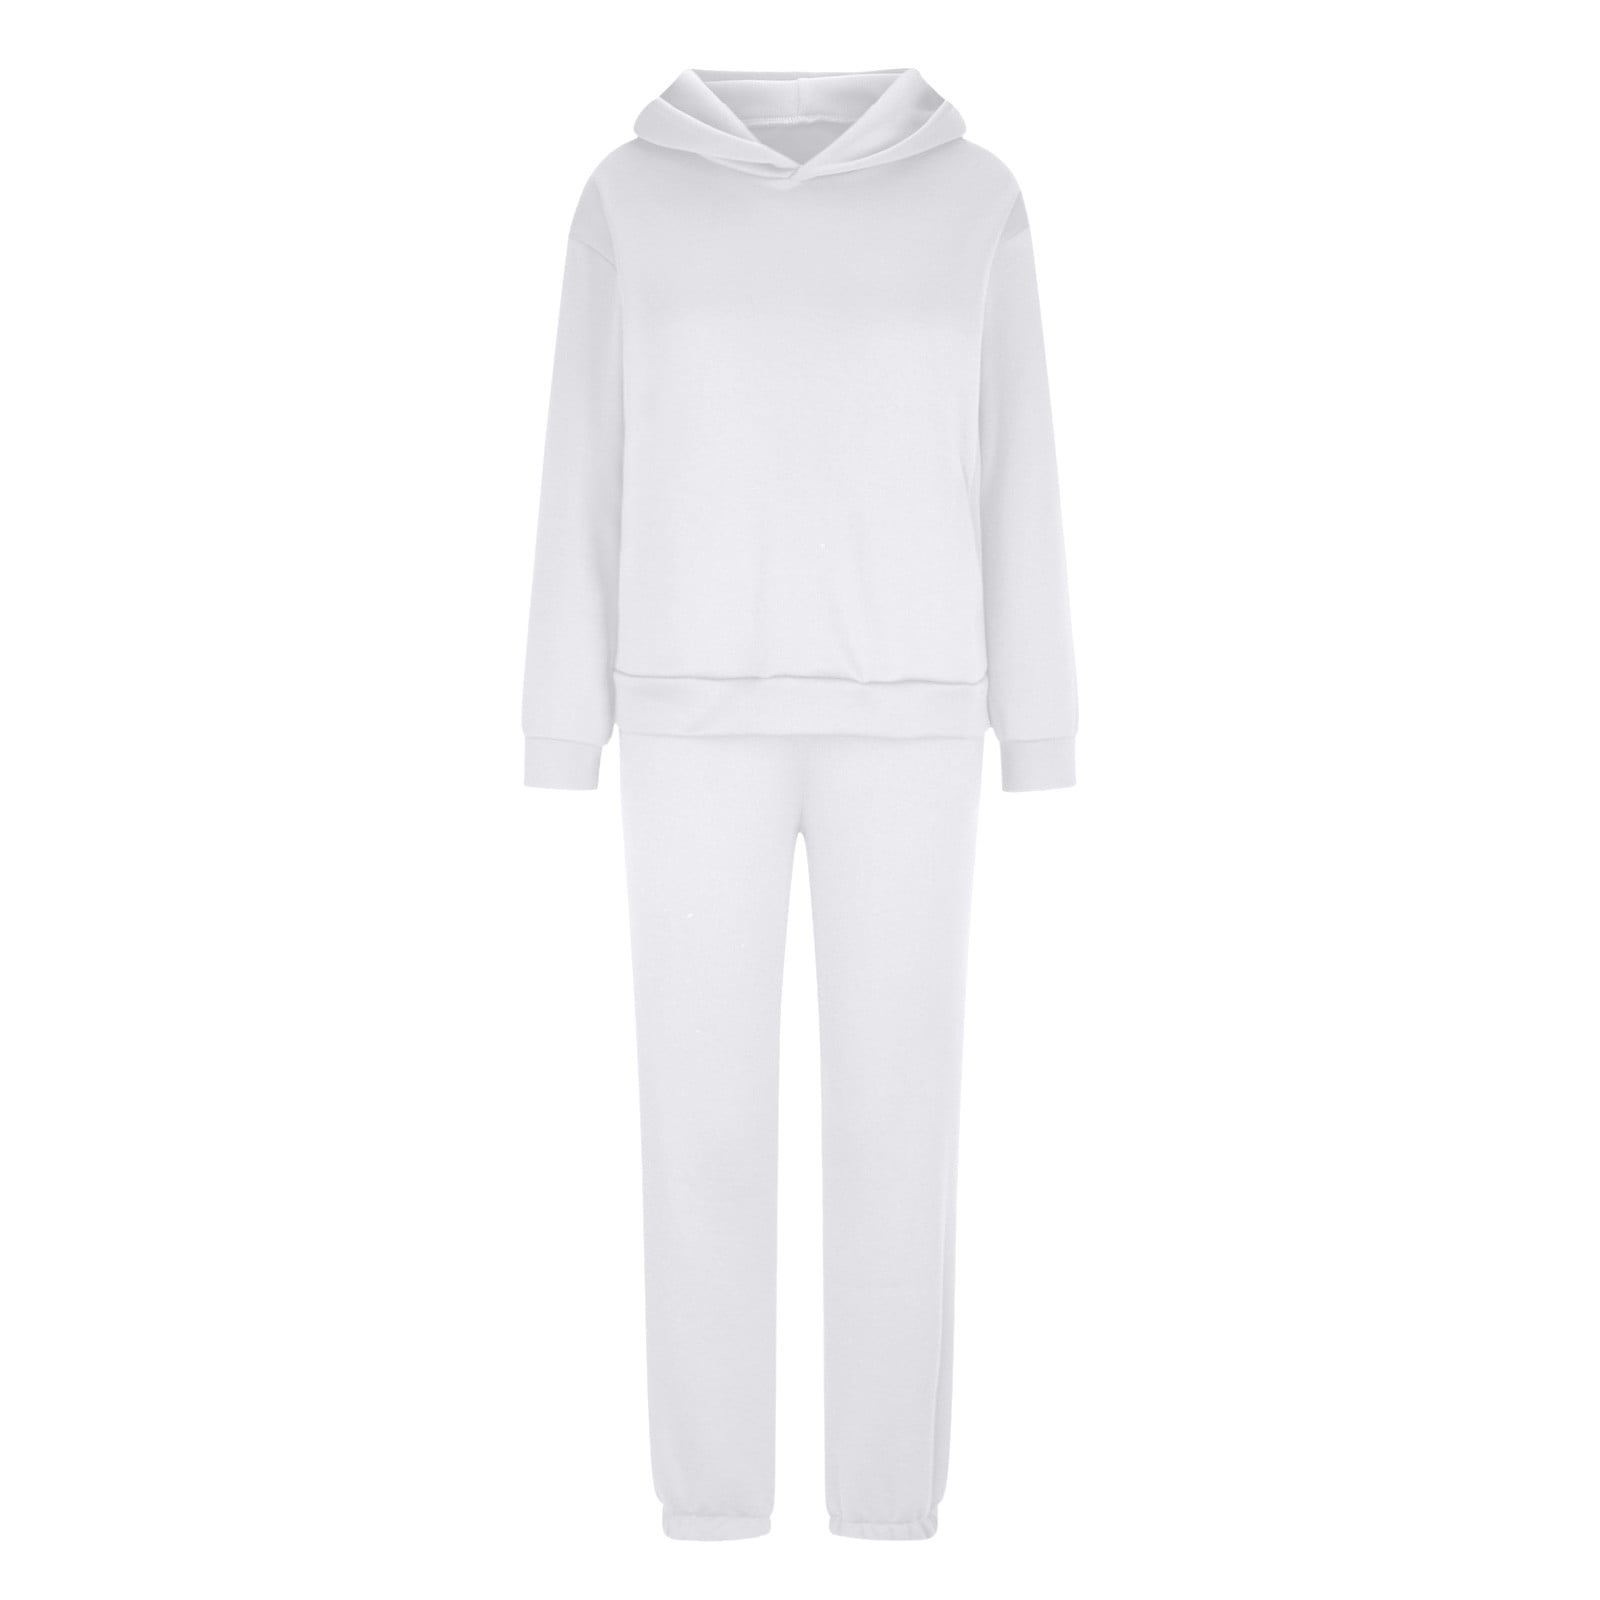 Fall Clearance Sale! RQYYD Sweatsuits for Women Set 2 Piece Jogging Suit  Long Sleeve Hooded Pullover Sweatshirts Sweatpants Tracksuit Casual Outfits(White,3XL)  